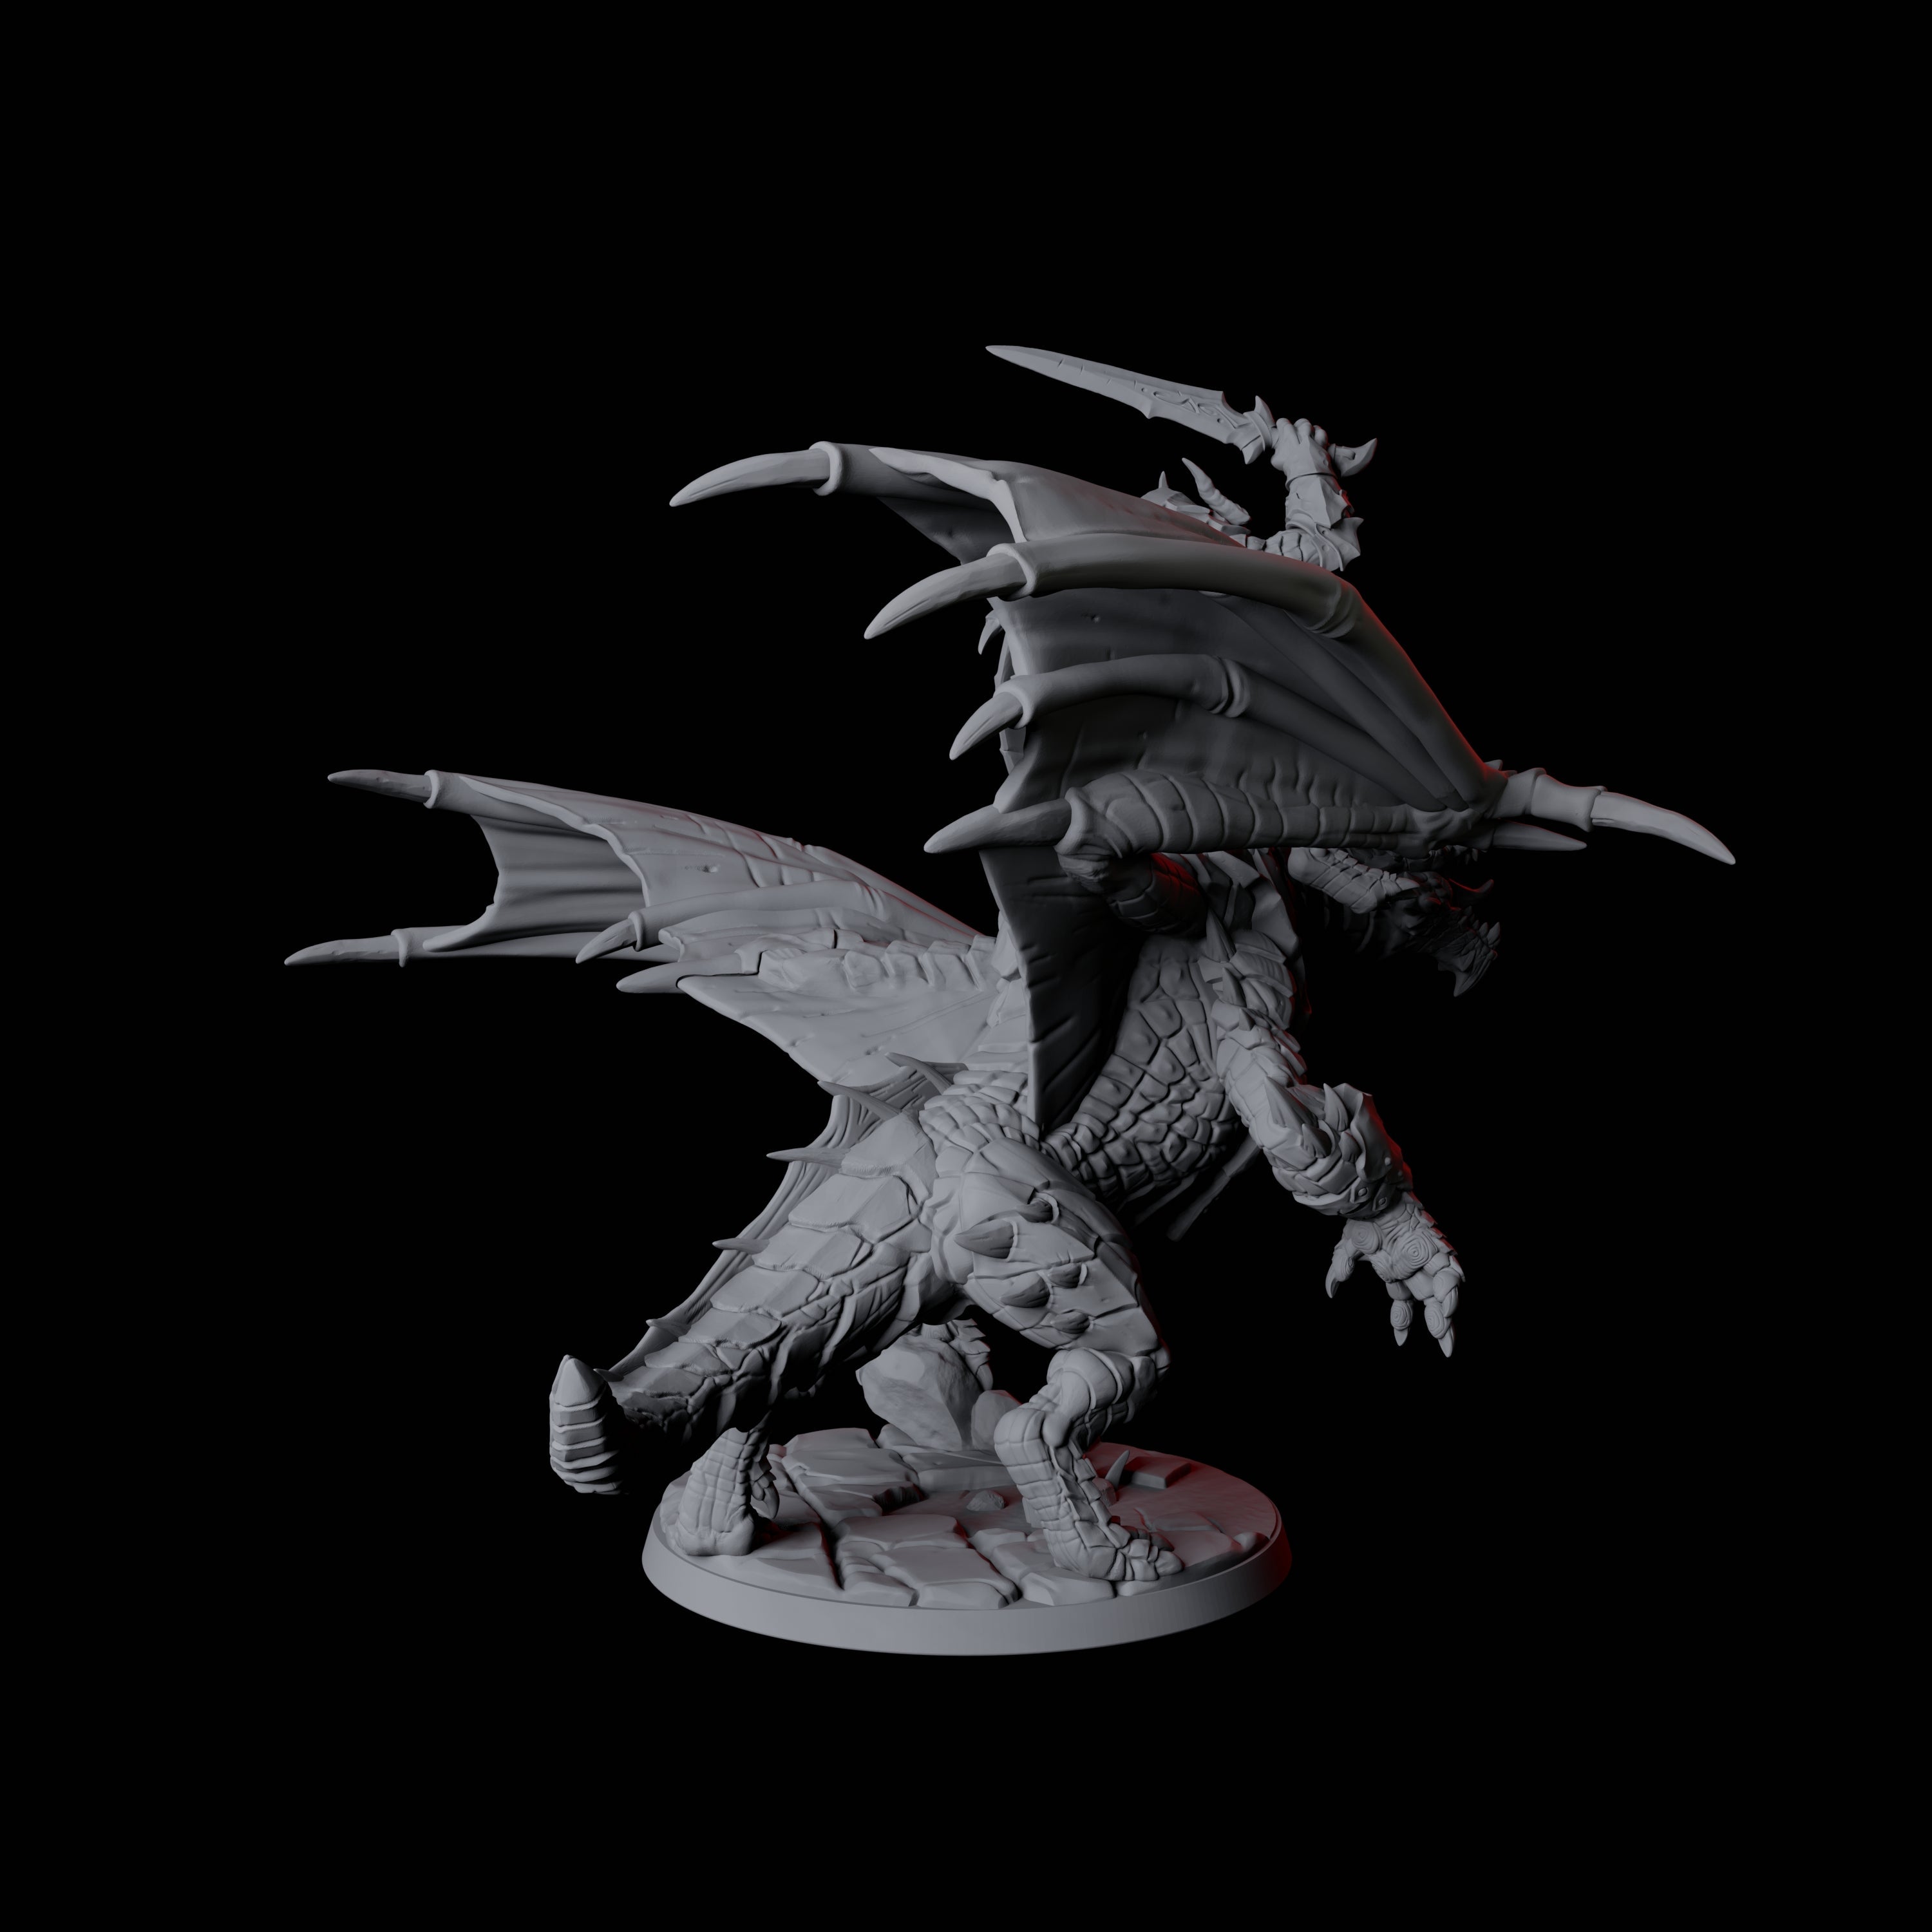 Valiant Dragonborn Warriors Riding Dragon B Miniature for Dungeons and Dragons, Pathfinder or other TTRPGs